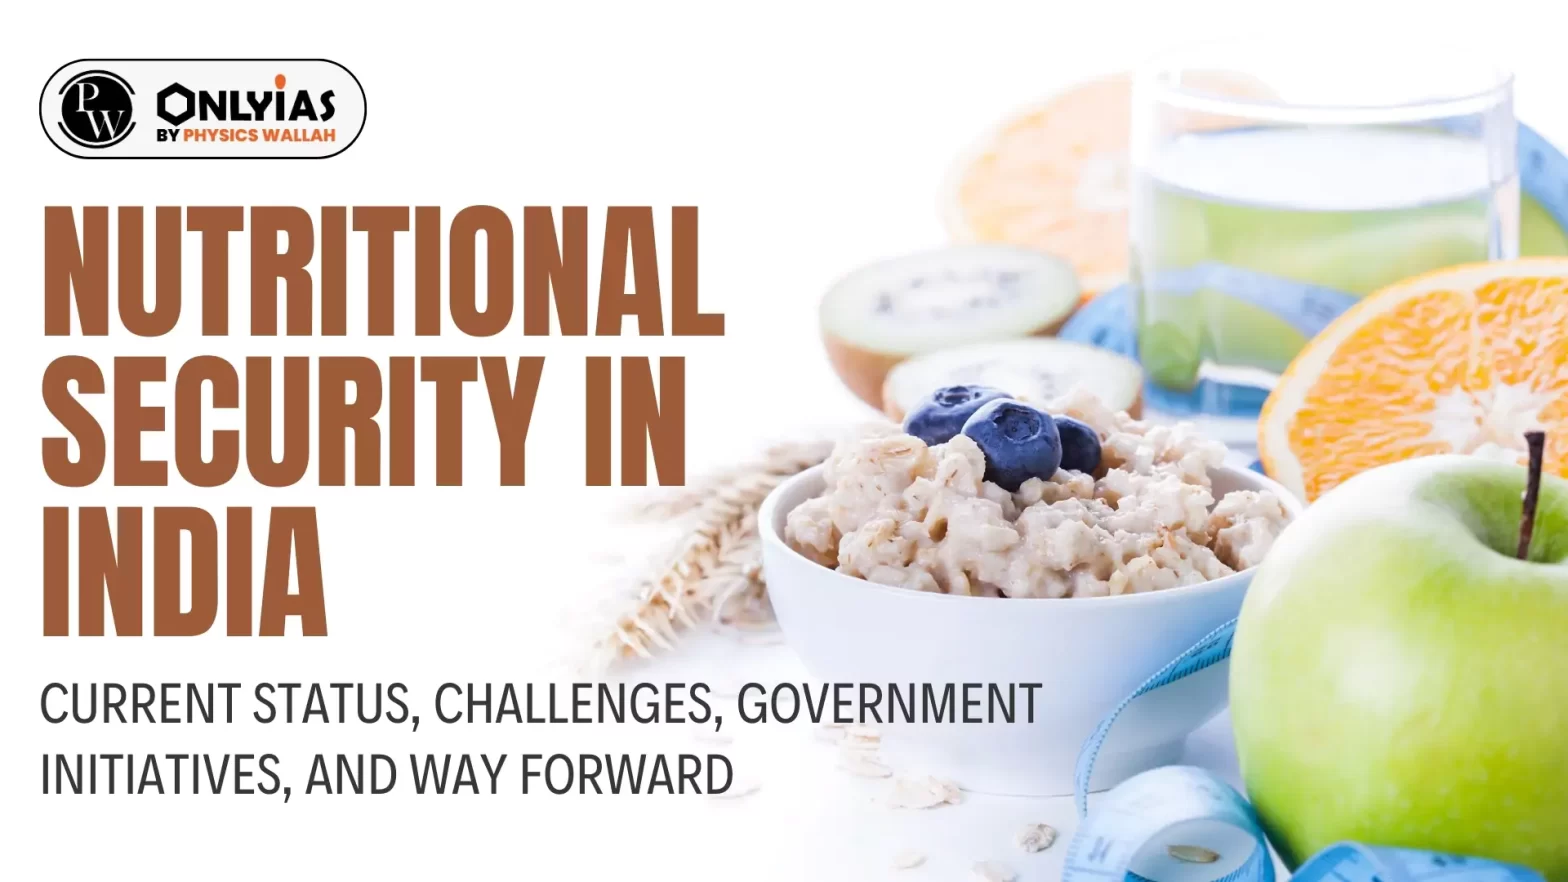 Nutritional Security in India: Current Status, Challenges, Government Initiatives, and Way Forward